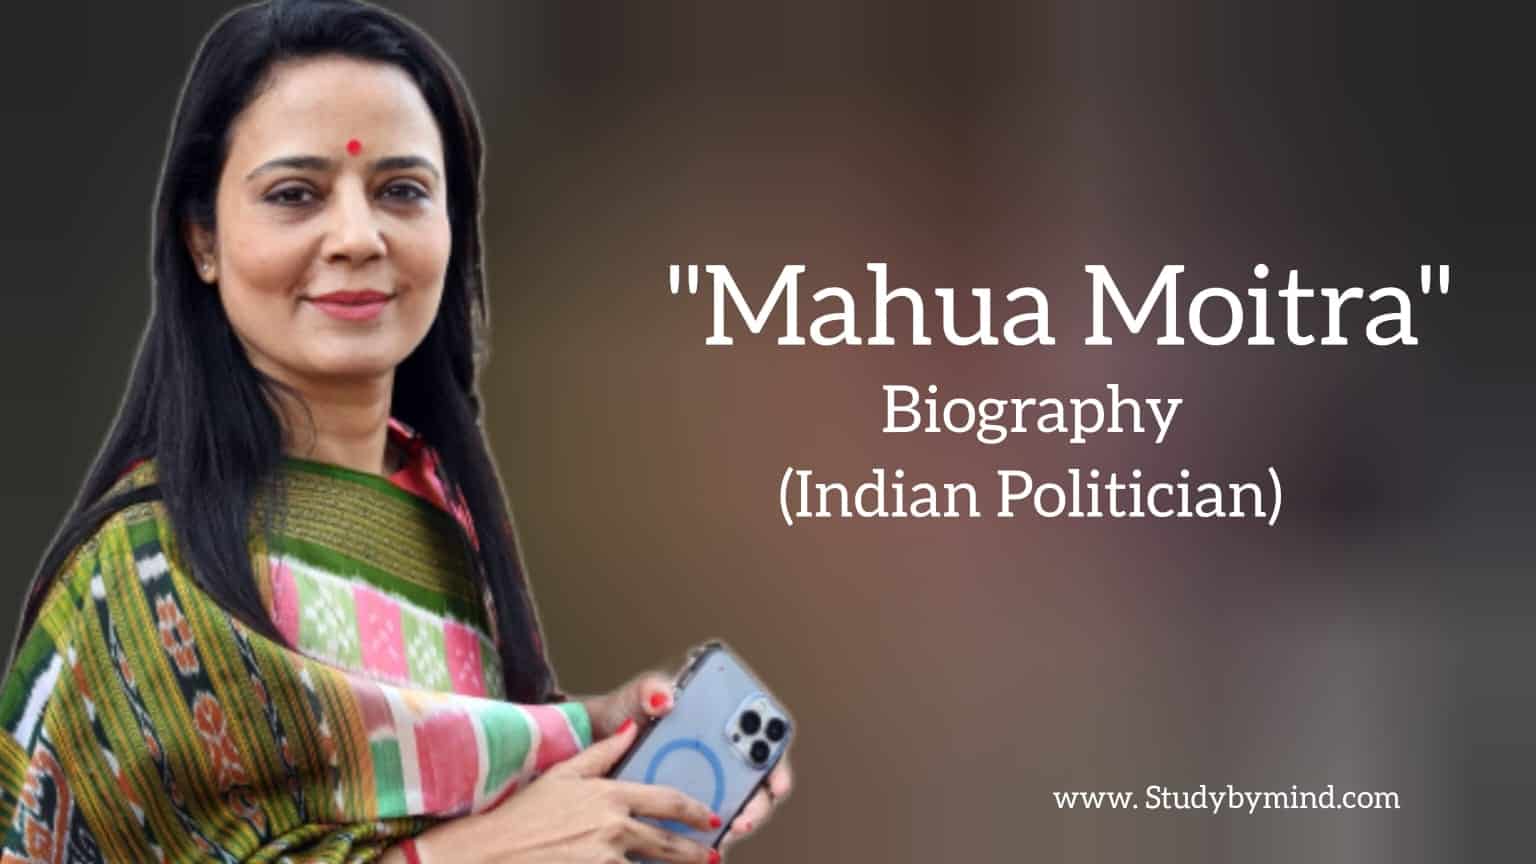 You are currently viewing Mahua moitra biography in english (Indian politician)